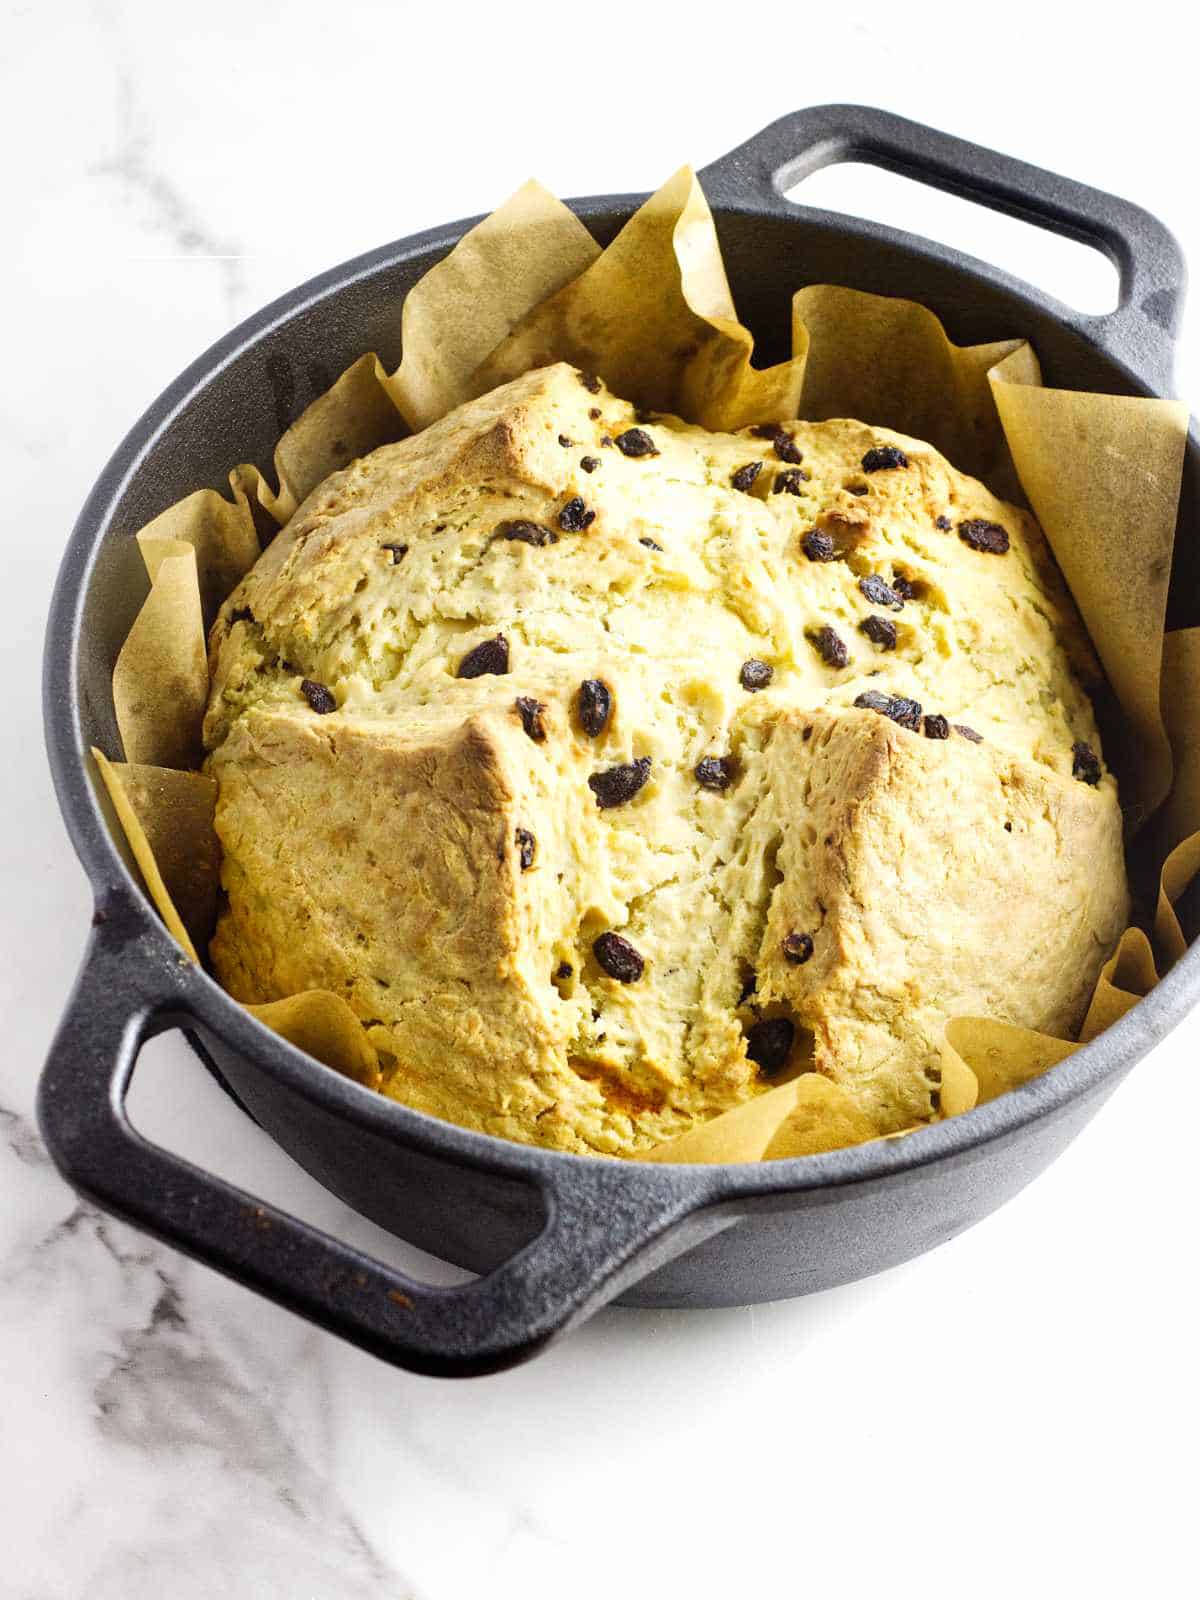 Baked soda bread with raisins in a Dutch oven.